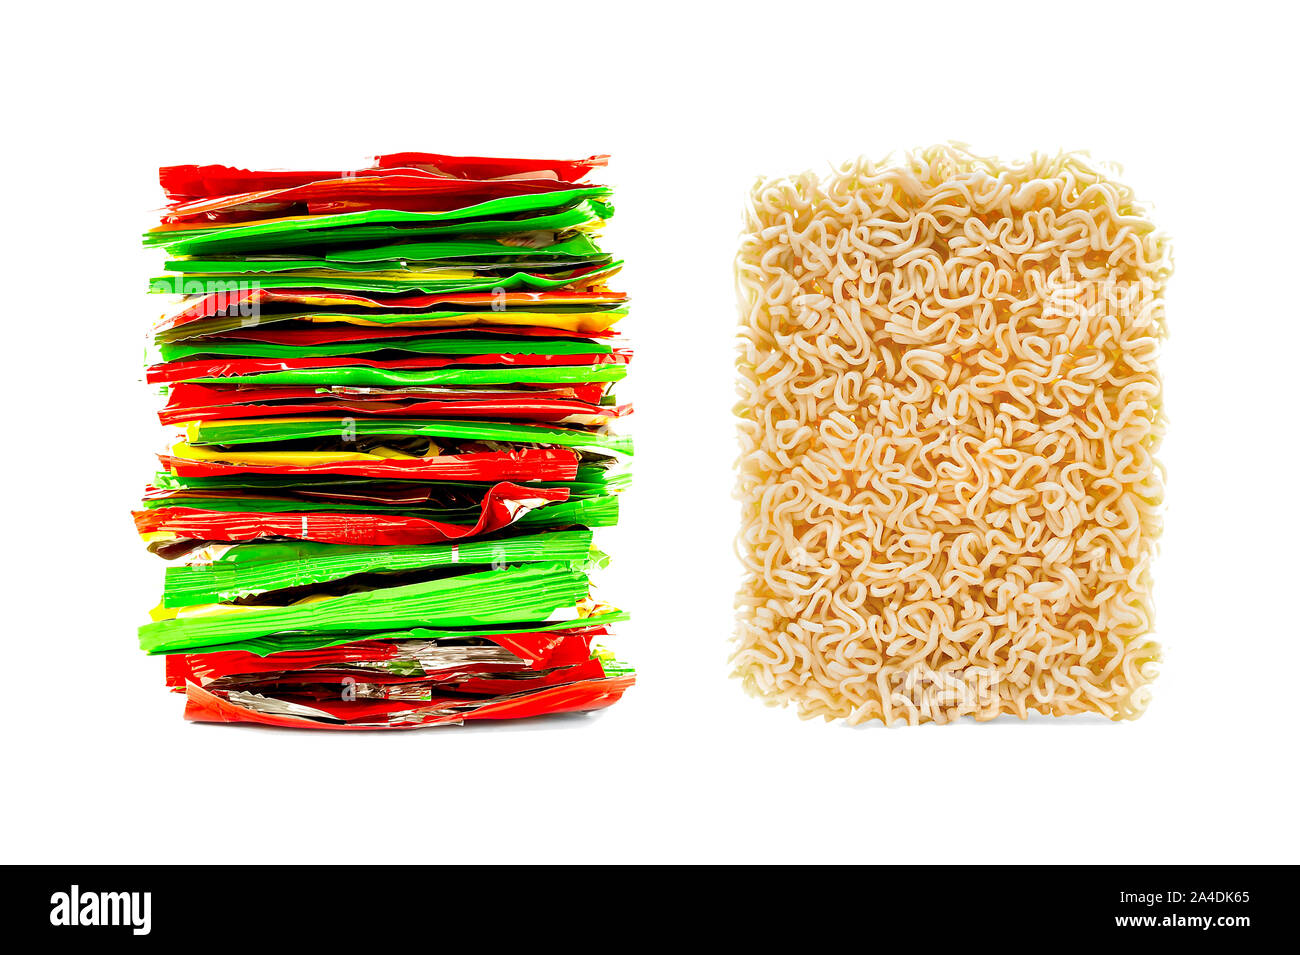 Stack of Multicolored Foil Plastic Bags and Block of Dried Instant Noodles, Ramen Isolated on White Background. Fast Food, Recycling, Workaholic, Stud Stock Photo